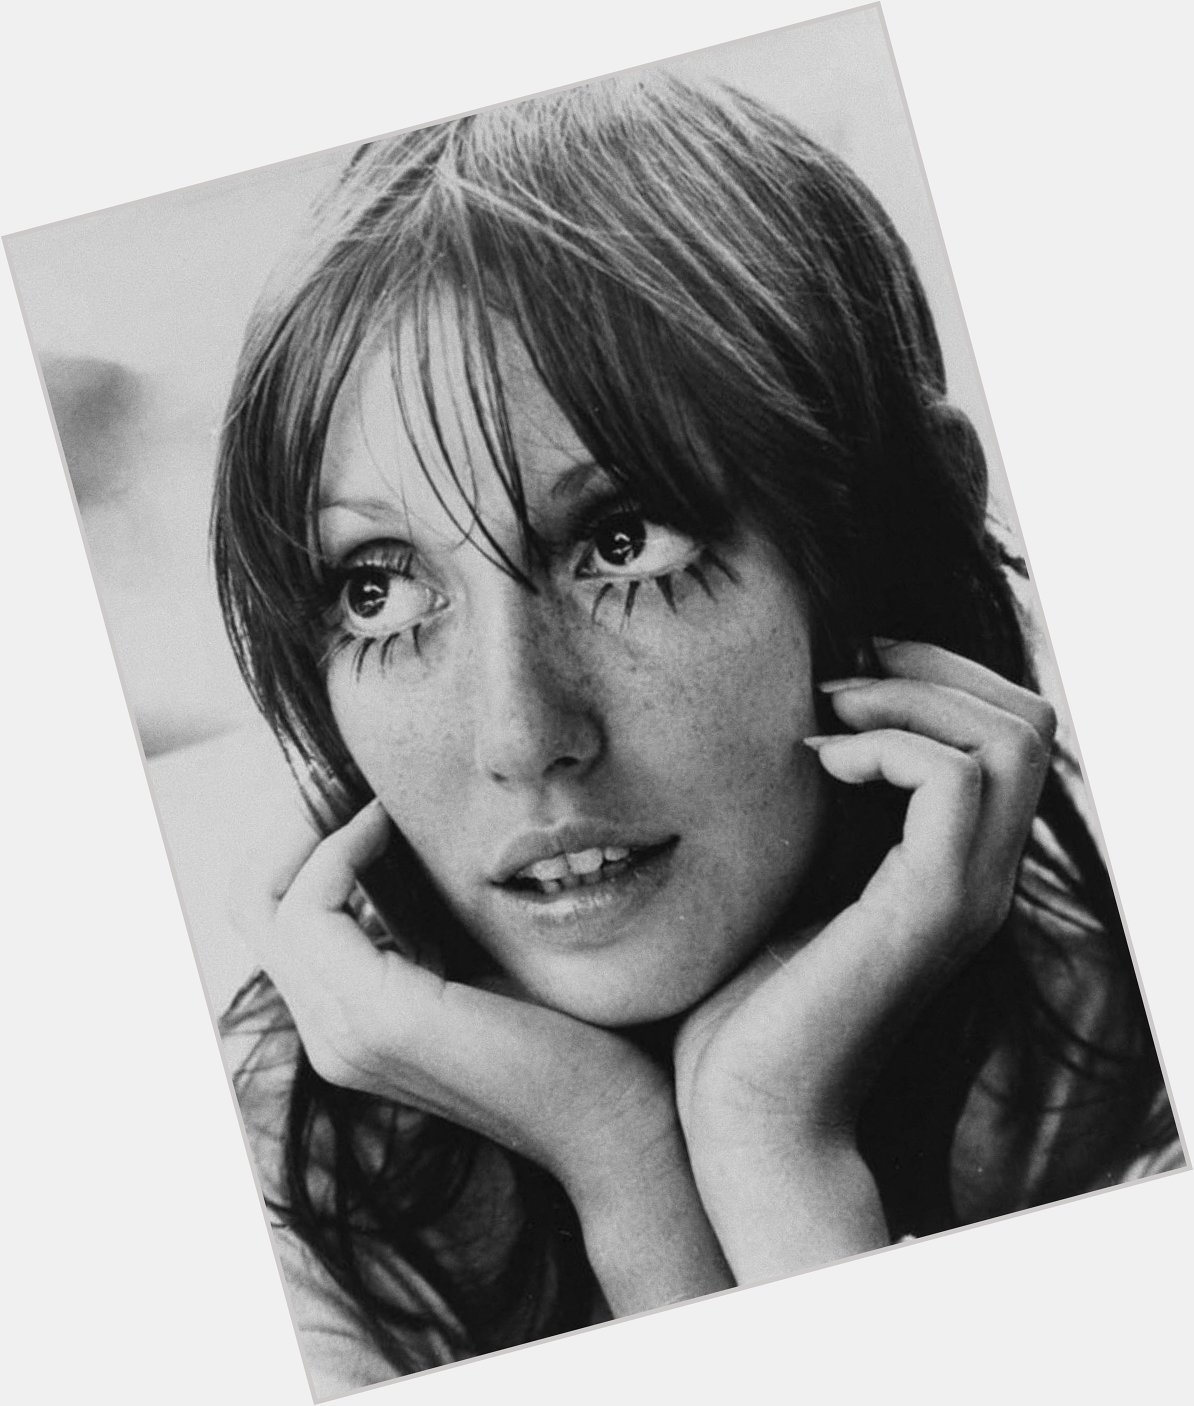 Happy birthday to the legend, shelley duvall born july 7th, 1949. 